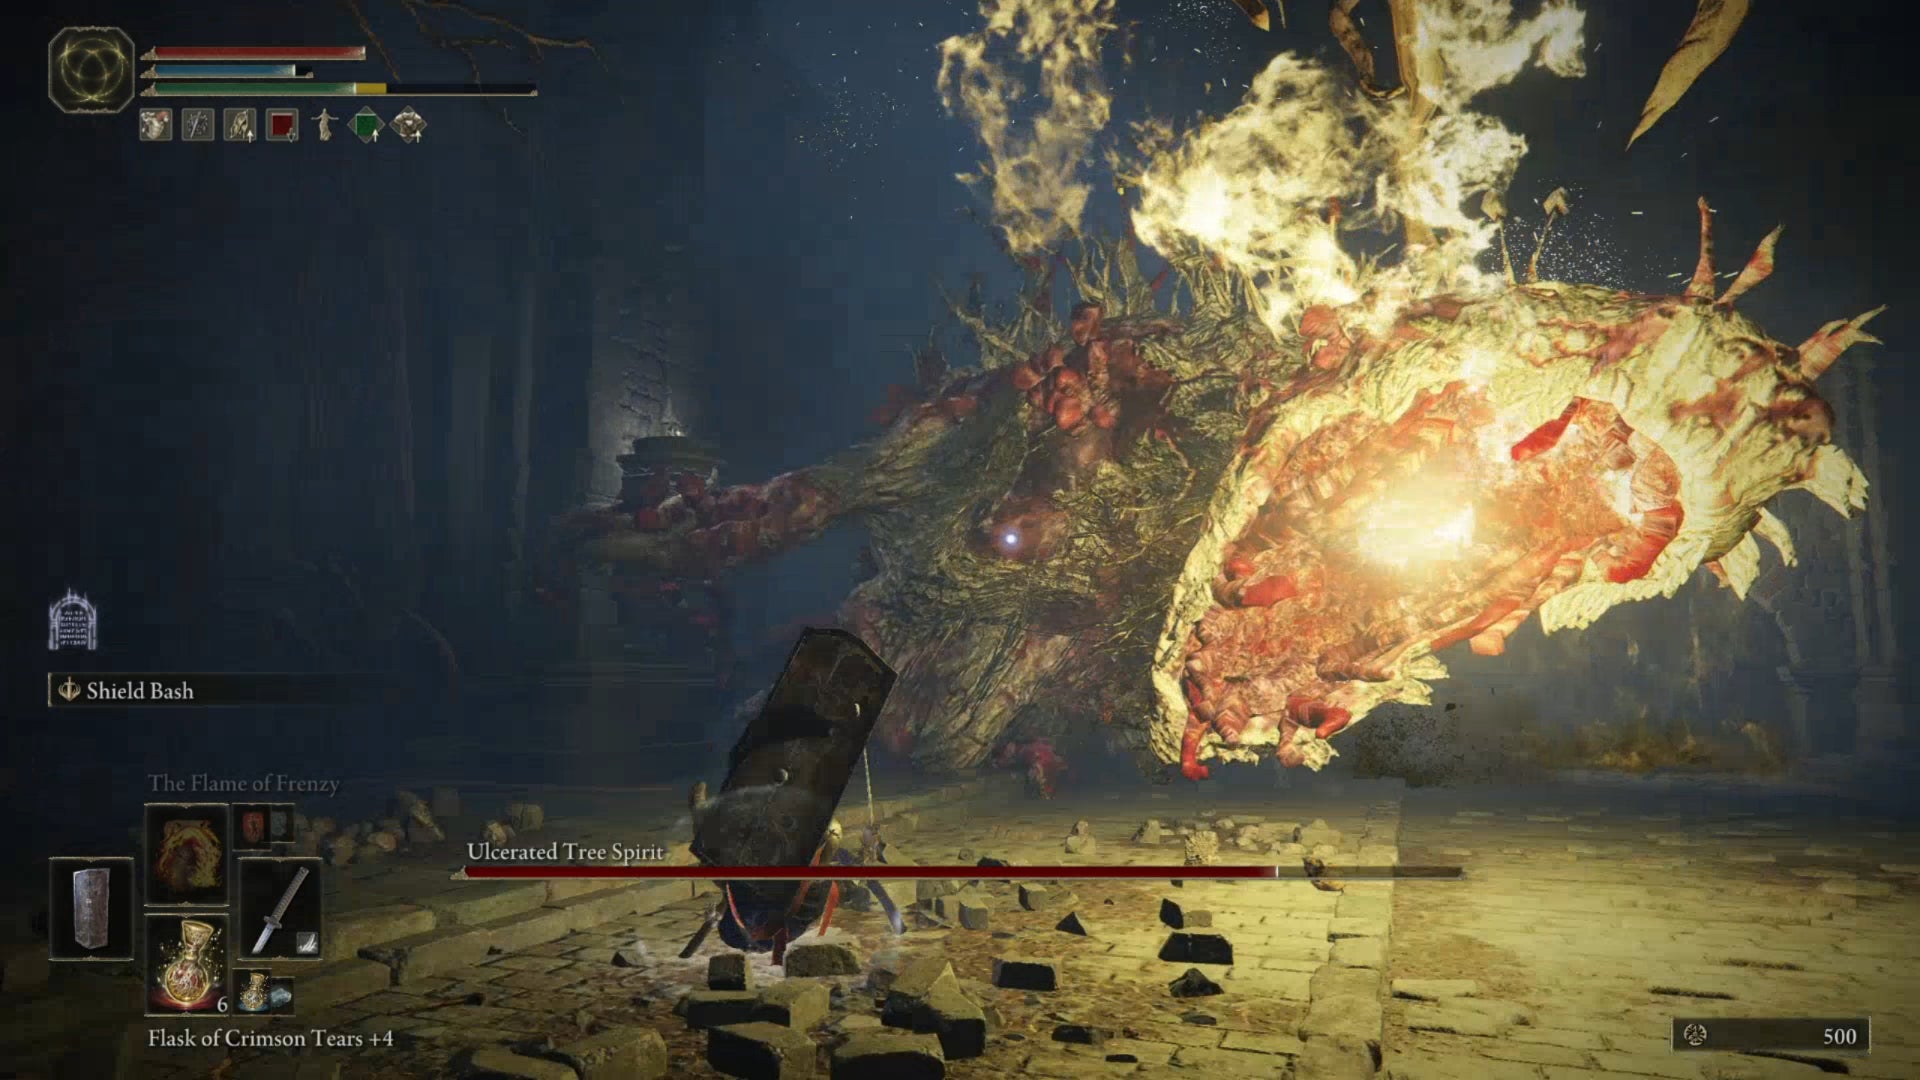 The Ulcerated Tree Spirit, a boss in Elden Ring, breathes fire towards the player.